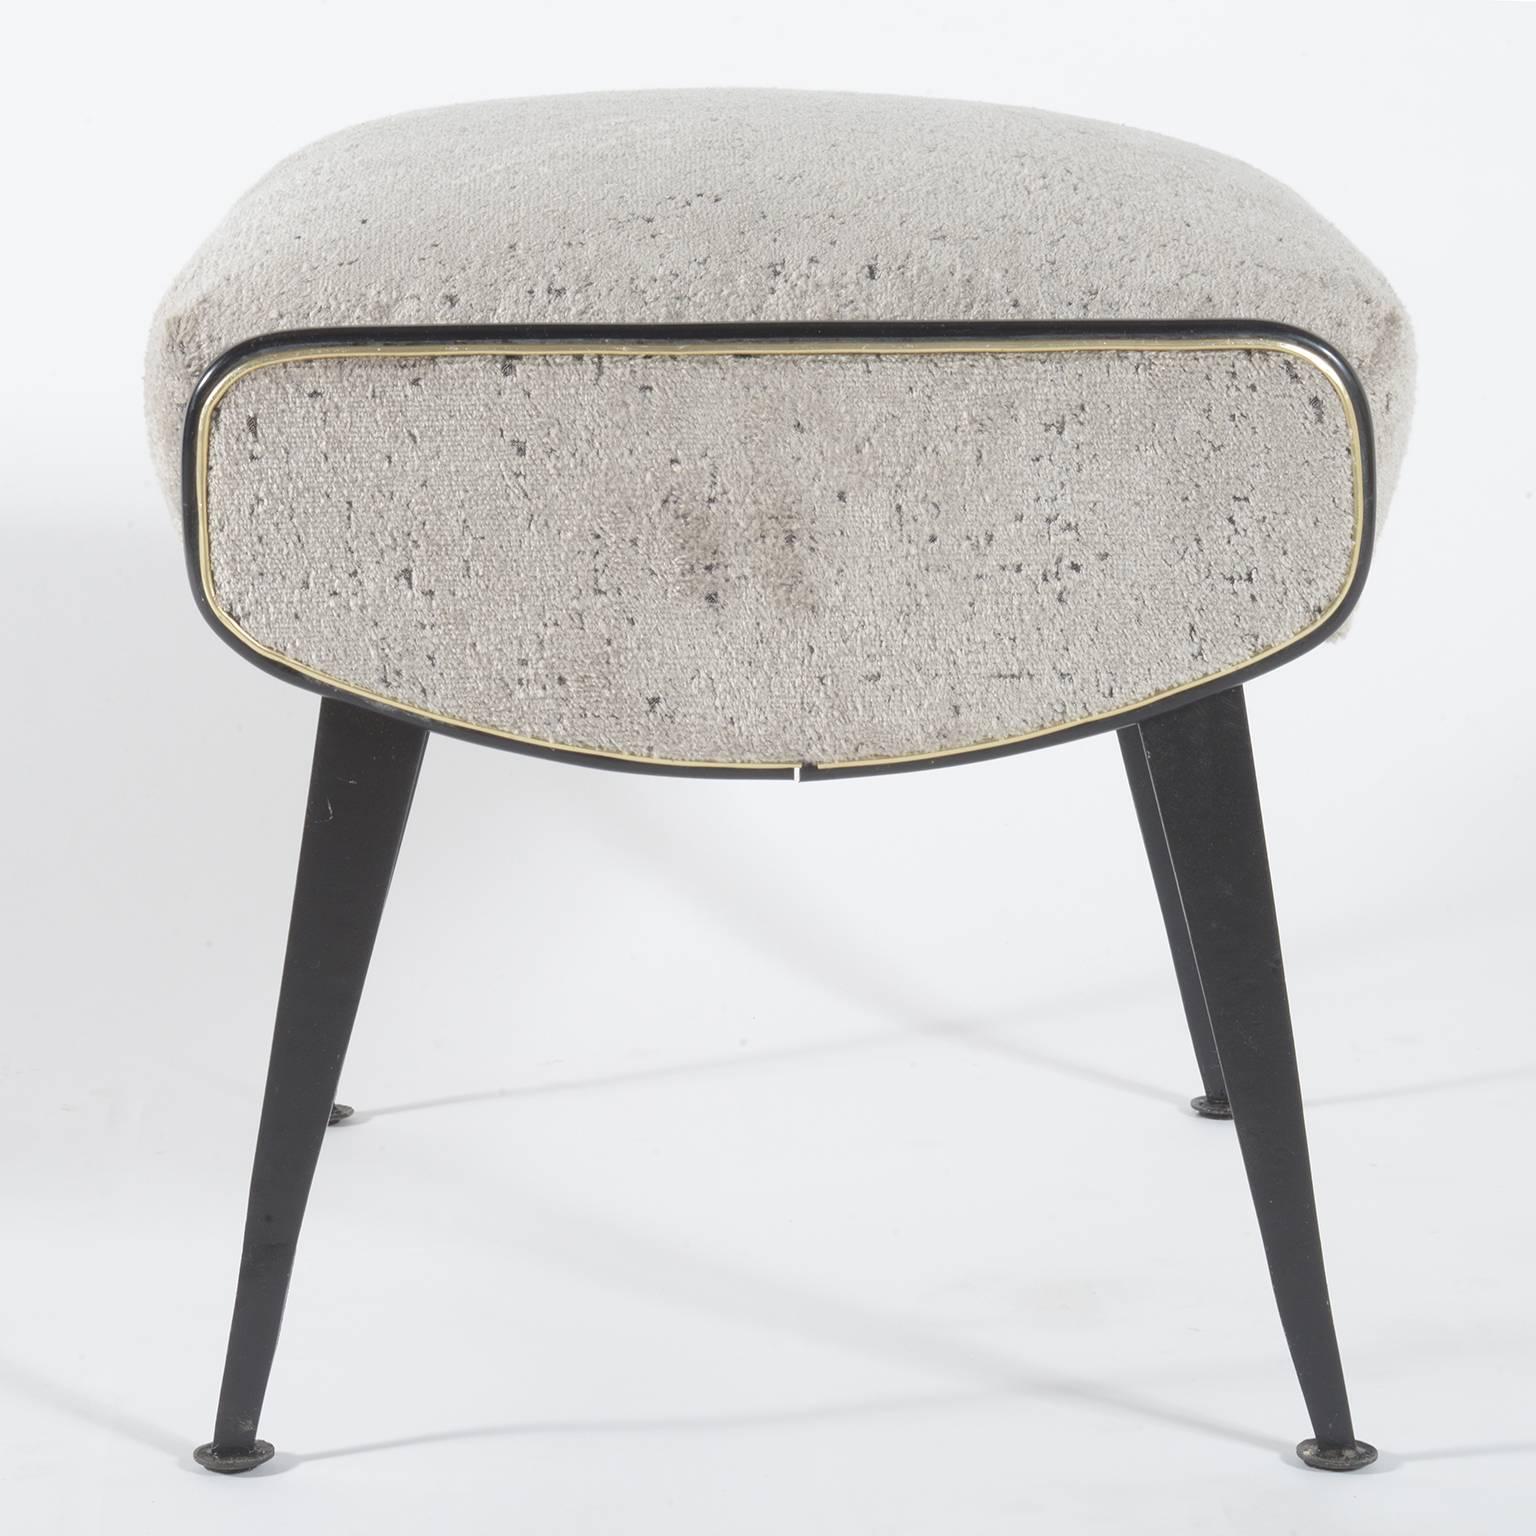 Pair of Italian, 1950s stools with slender black metal legs. The seats are newly covered with velvet fabric keeping the original trimmings details in black and silver.